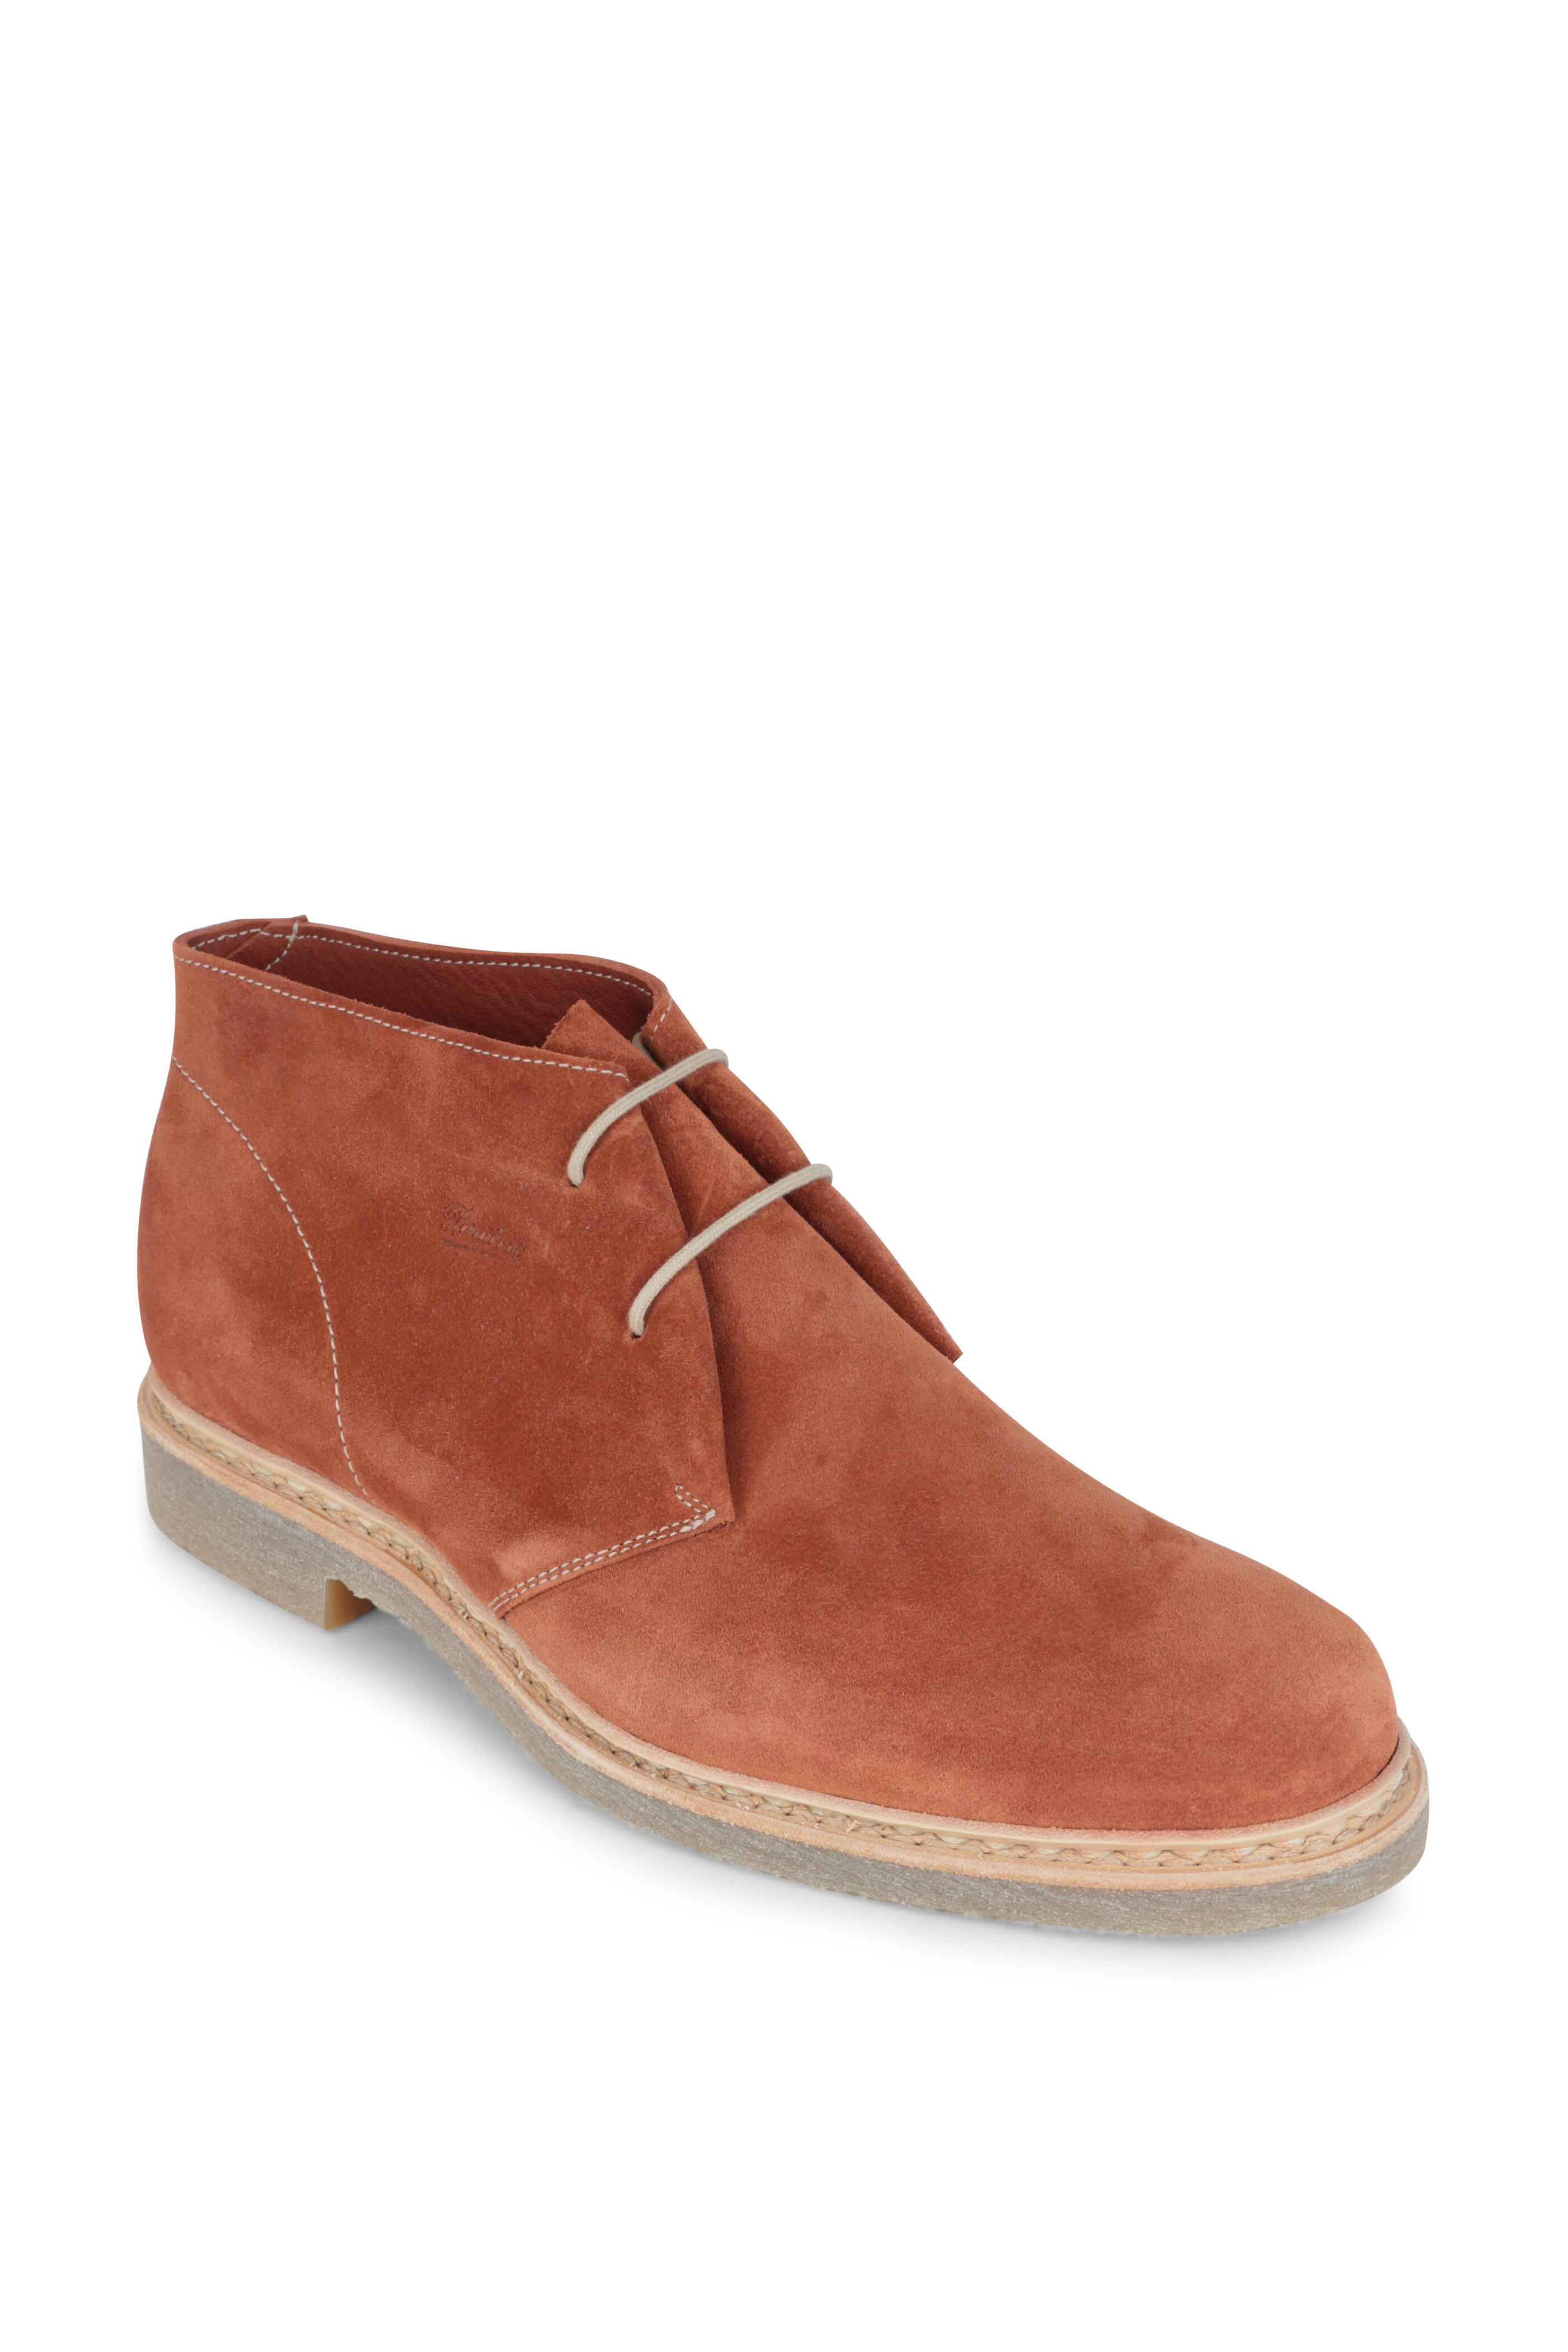 Paraboot - Riad Rust Suede Chukka Boot | Mitchell Stores